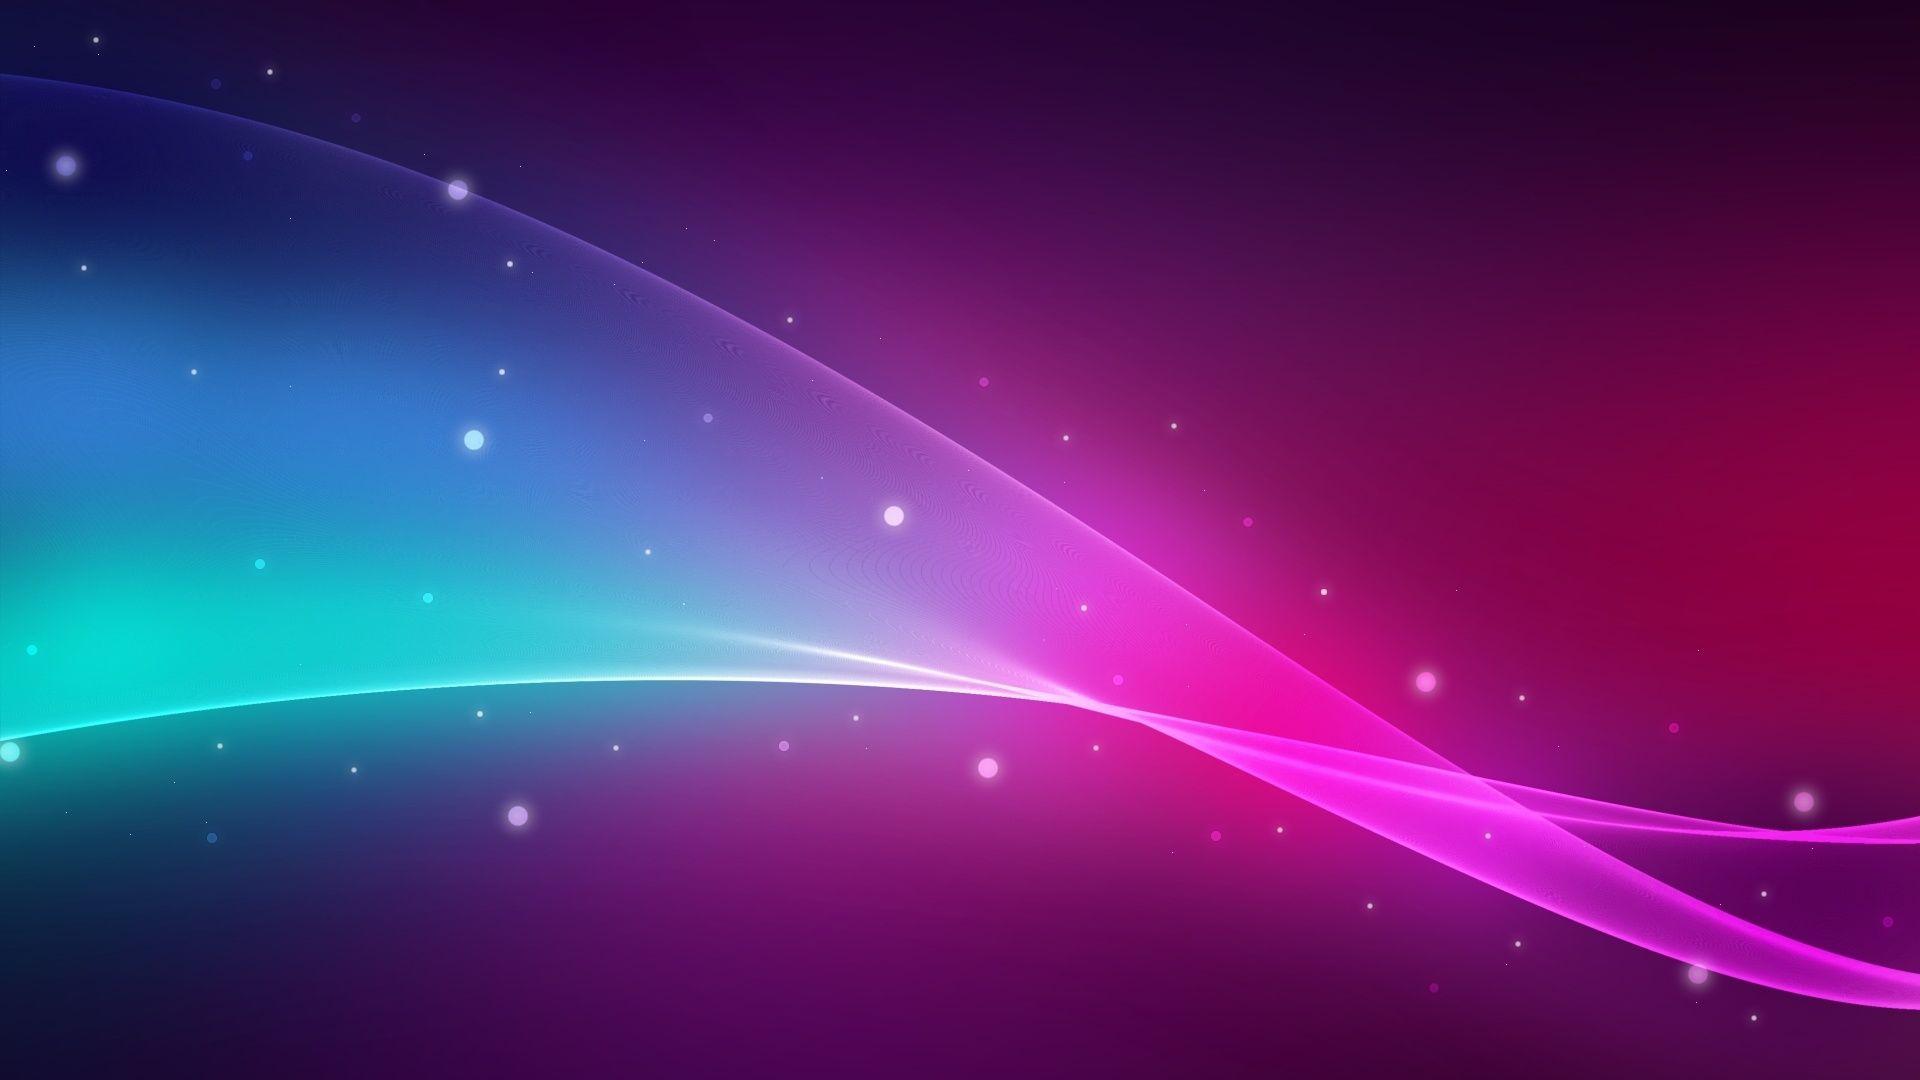 blue and pink backgrounds wallpaper cave blue and pink backgrounds wallpaper cave